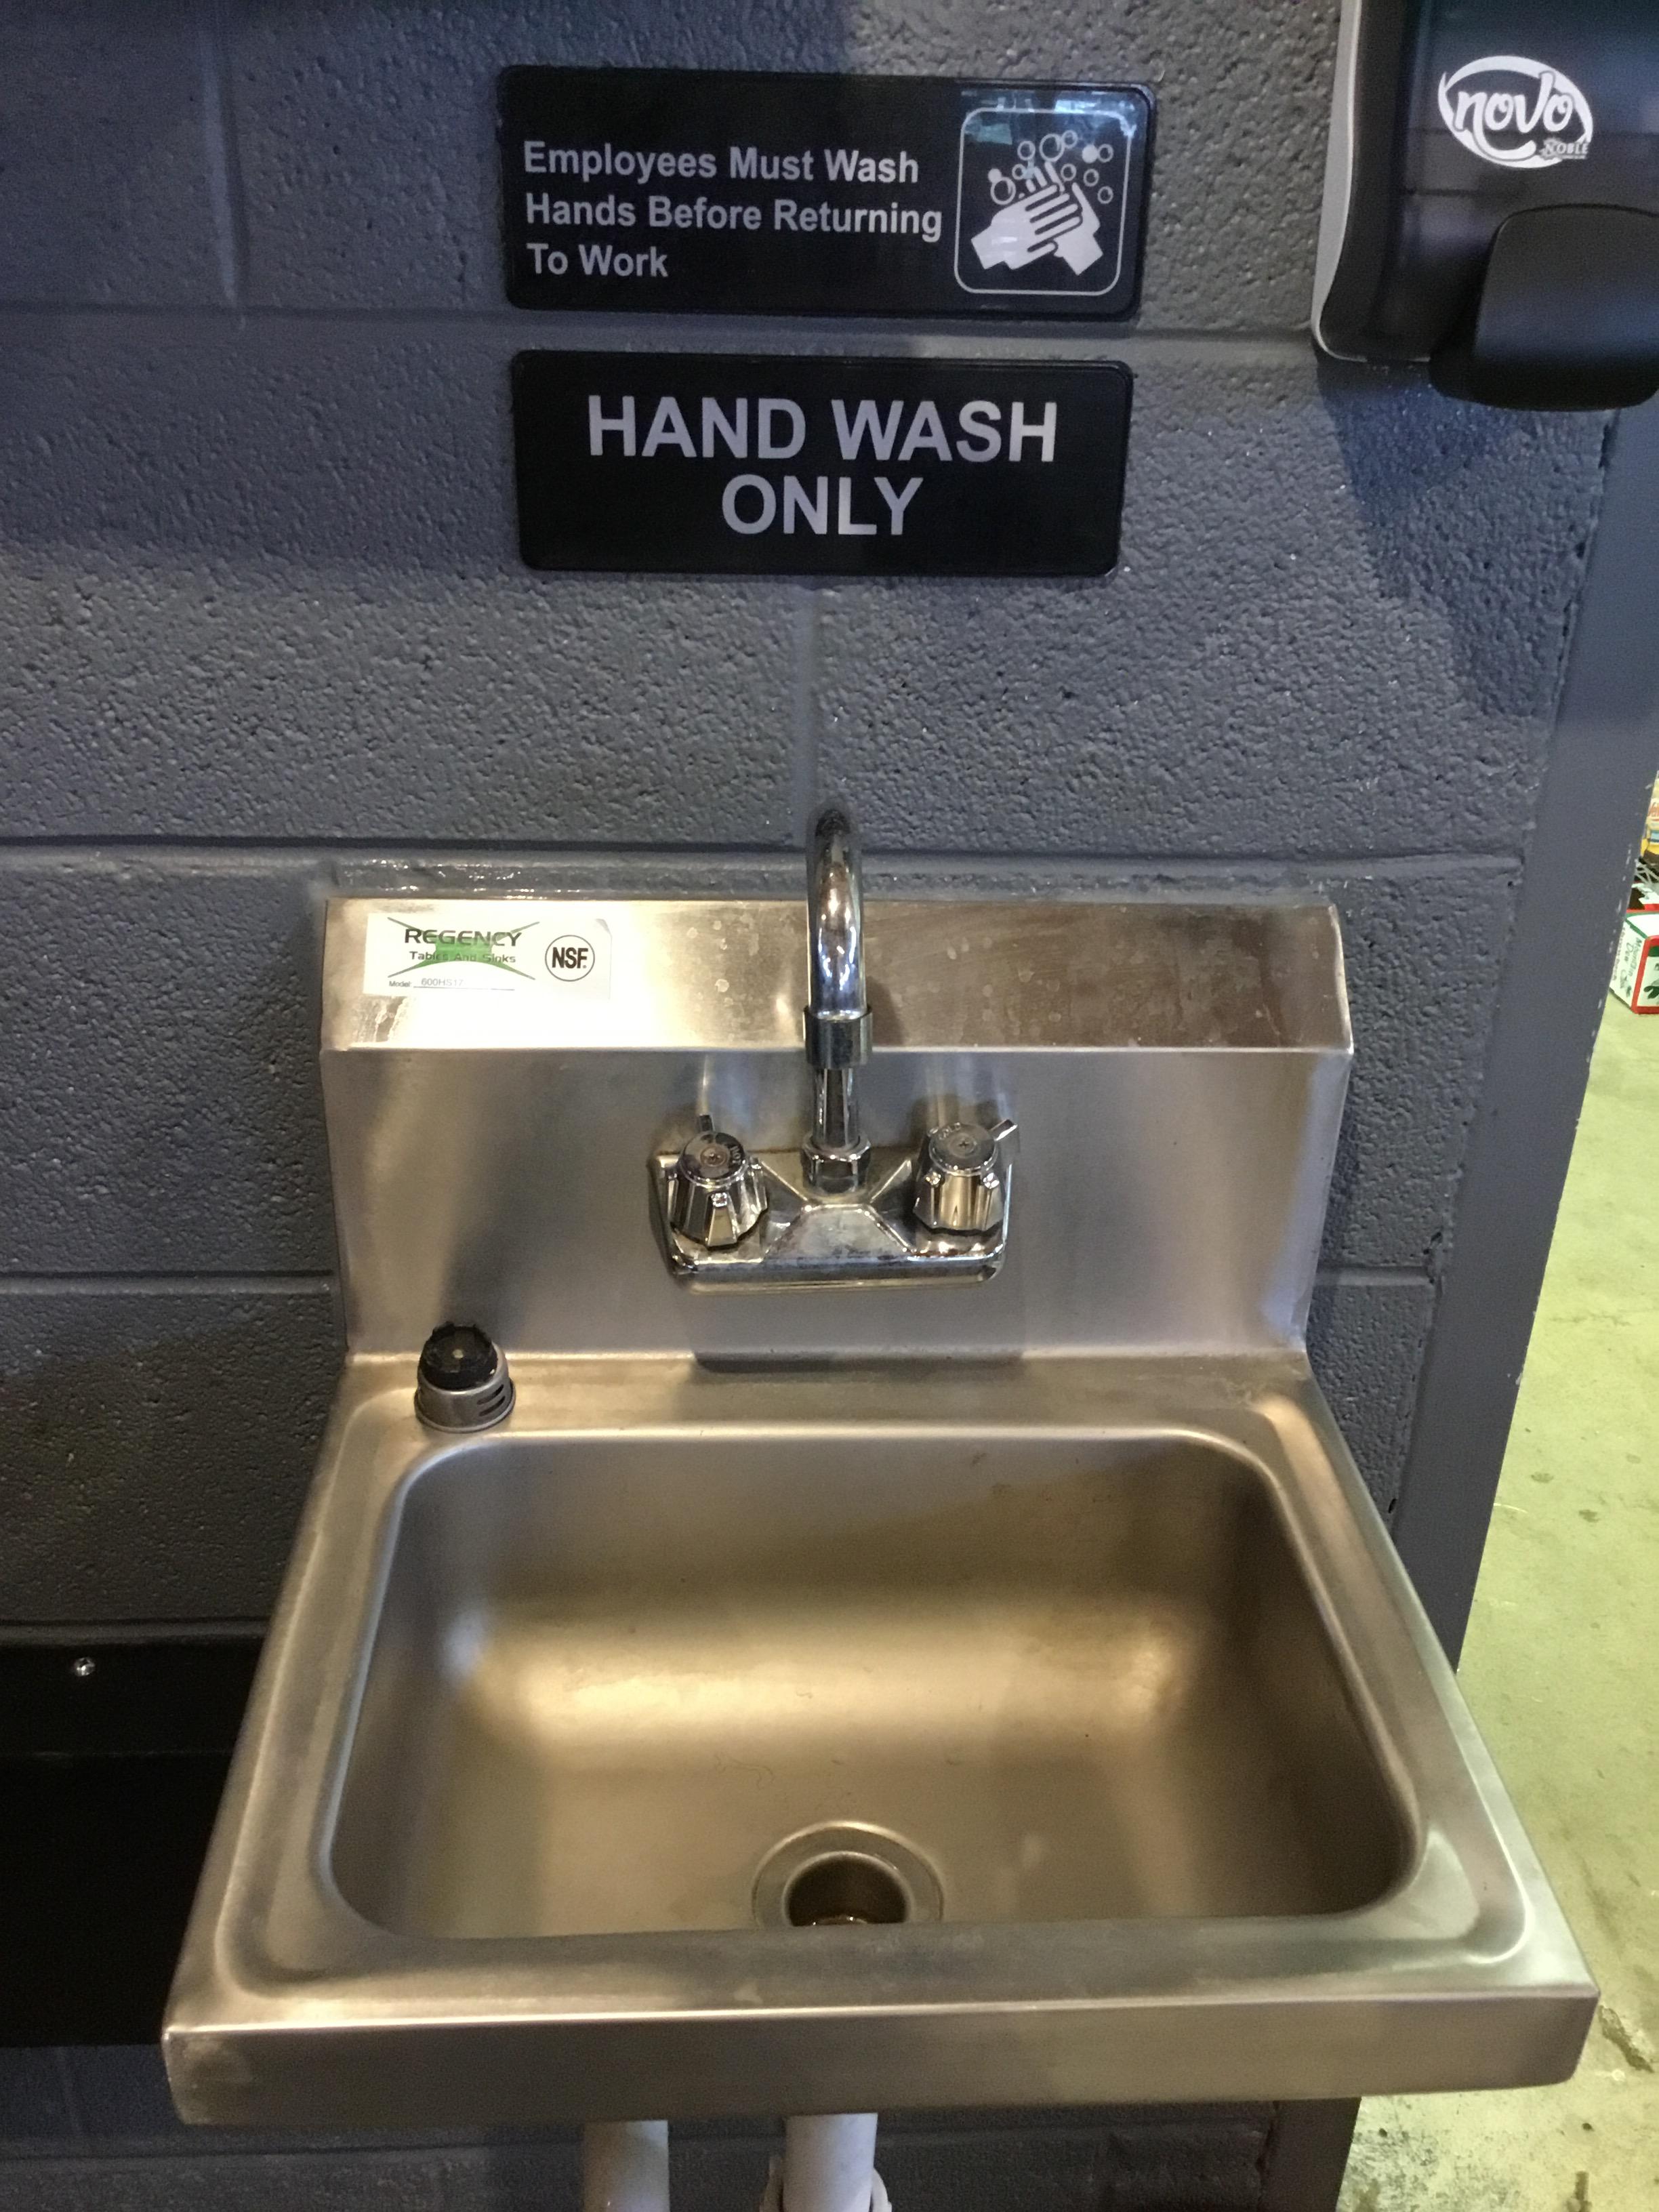 Hand Wash Only Sign Black And White 9 X 3